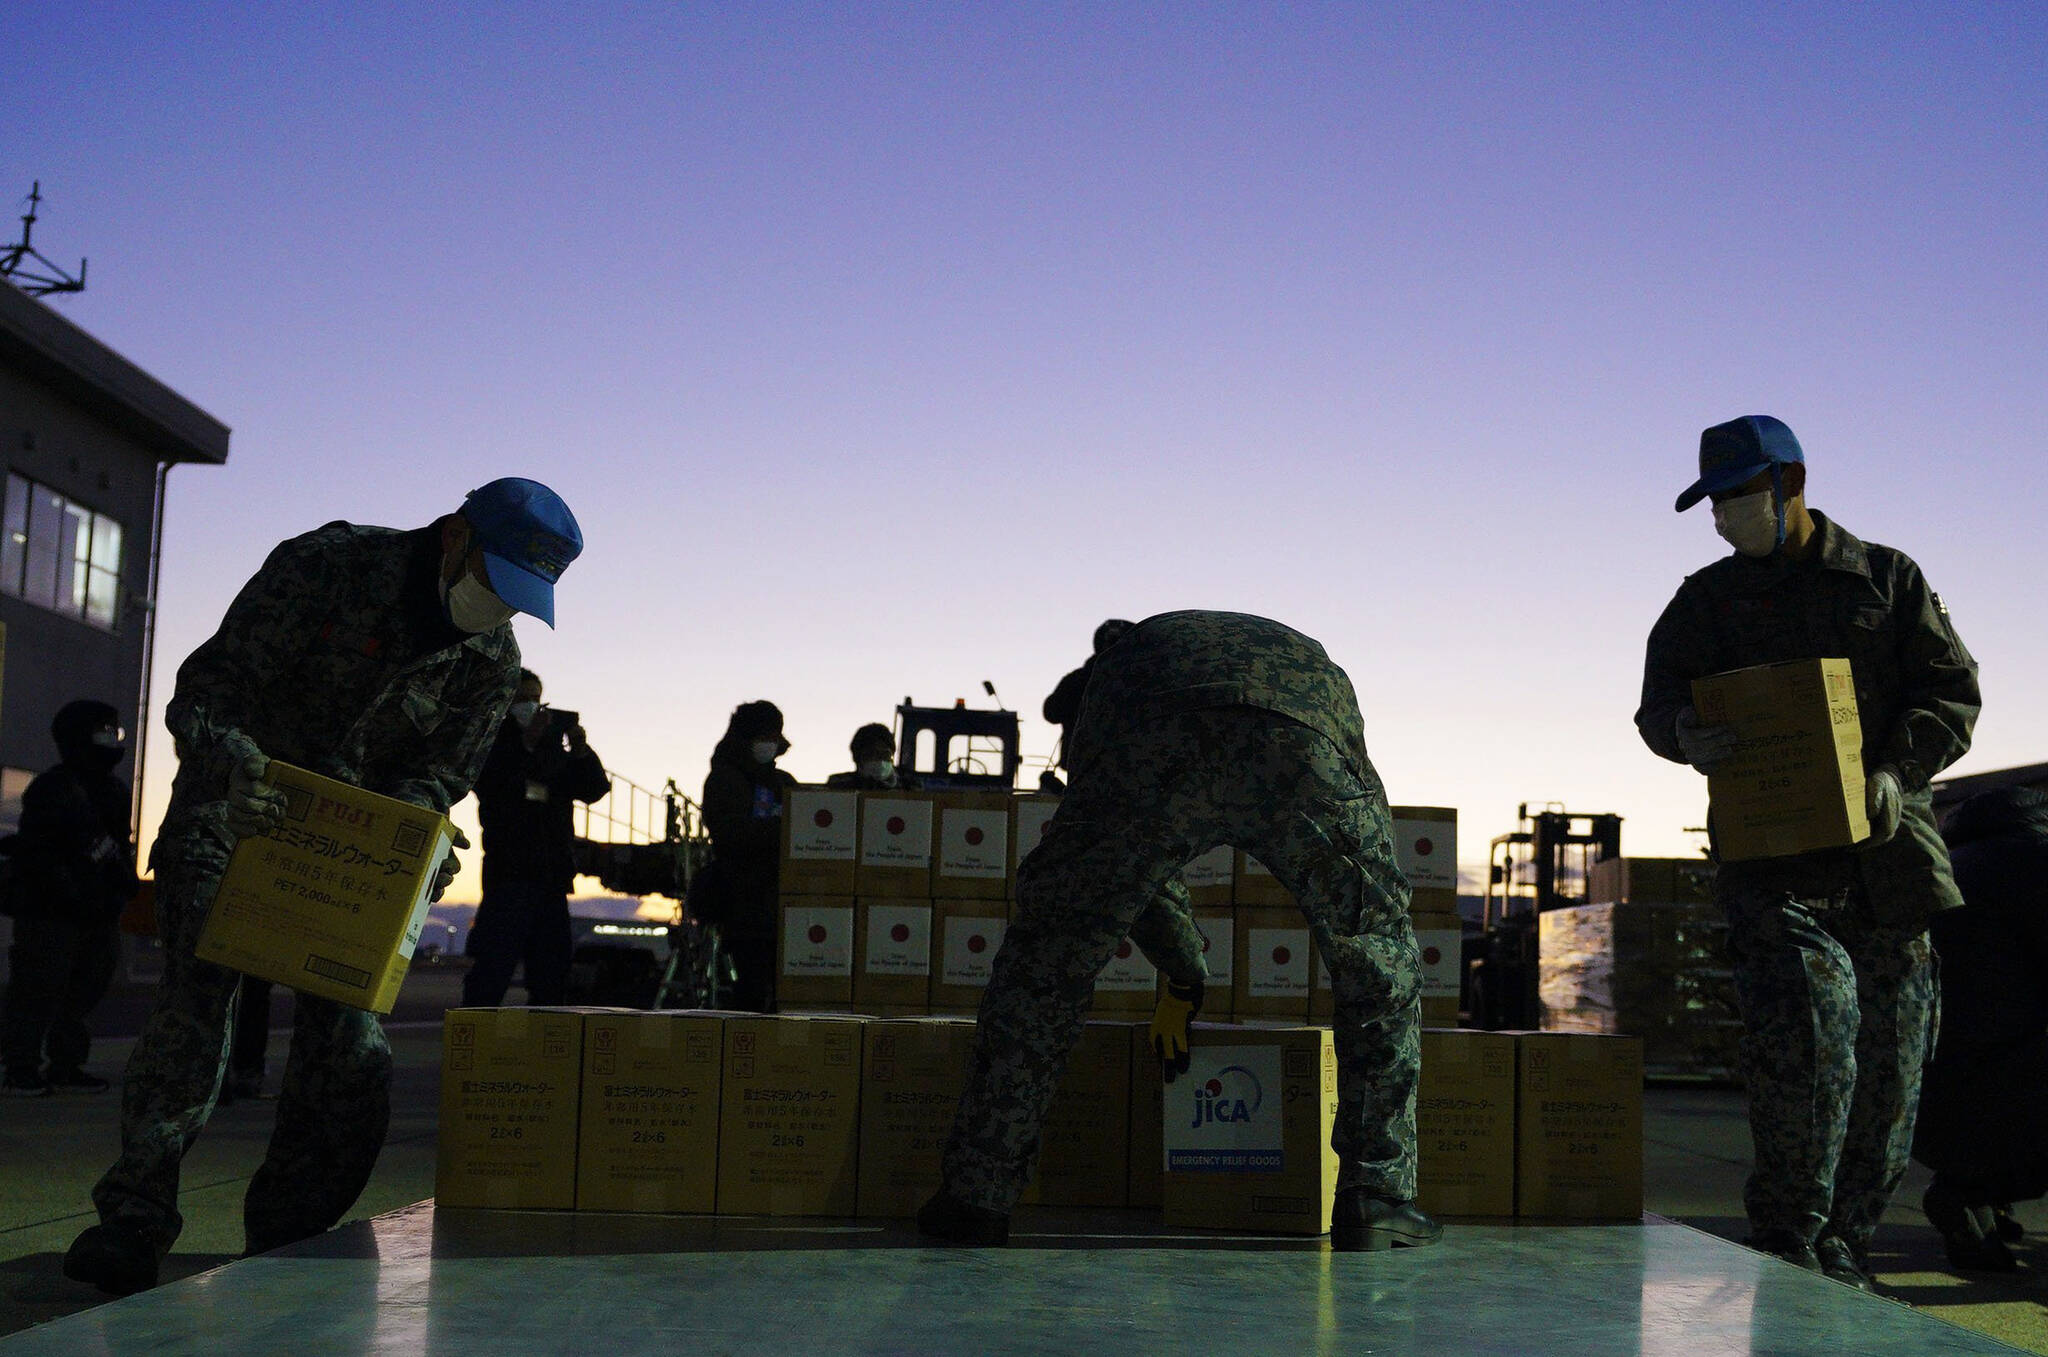 Members of Japan’s Air Self-Defense Force help load boxes of water into an airplane at an airbase in Komaki, central Japan, Thursday, Jan. 20, 2022, as they were preparing to take off for Australia on their way to Tonga to transport the emergency relief goods, following Saturday’s volcanic eruption near the Pacific nation. Japan’s Defense Ministry said it would send emergency relief, including drinking water and equipment for cleaning away volcanic ash. (Kyodo News via AP)